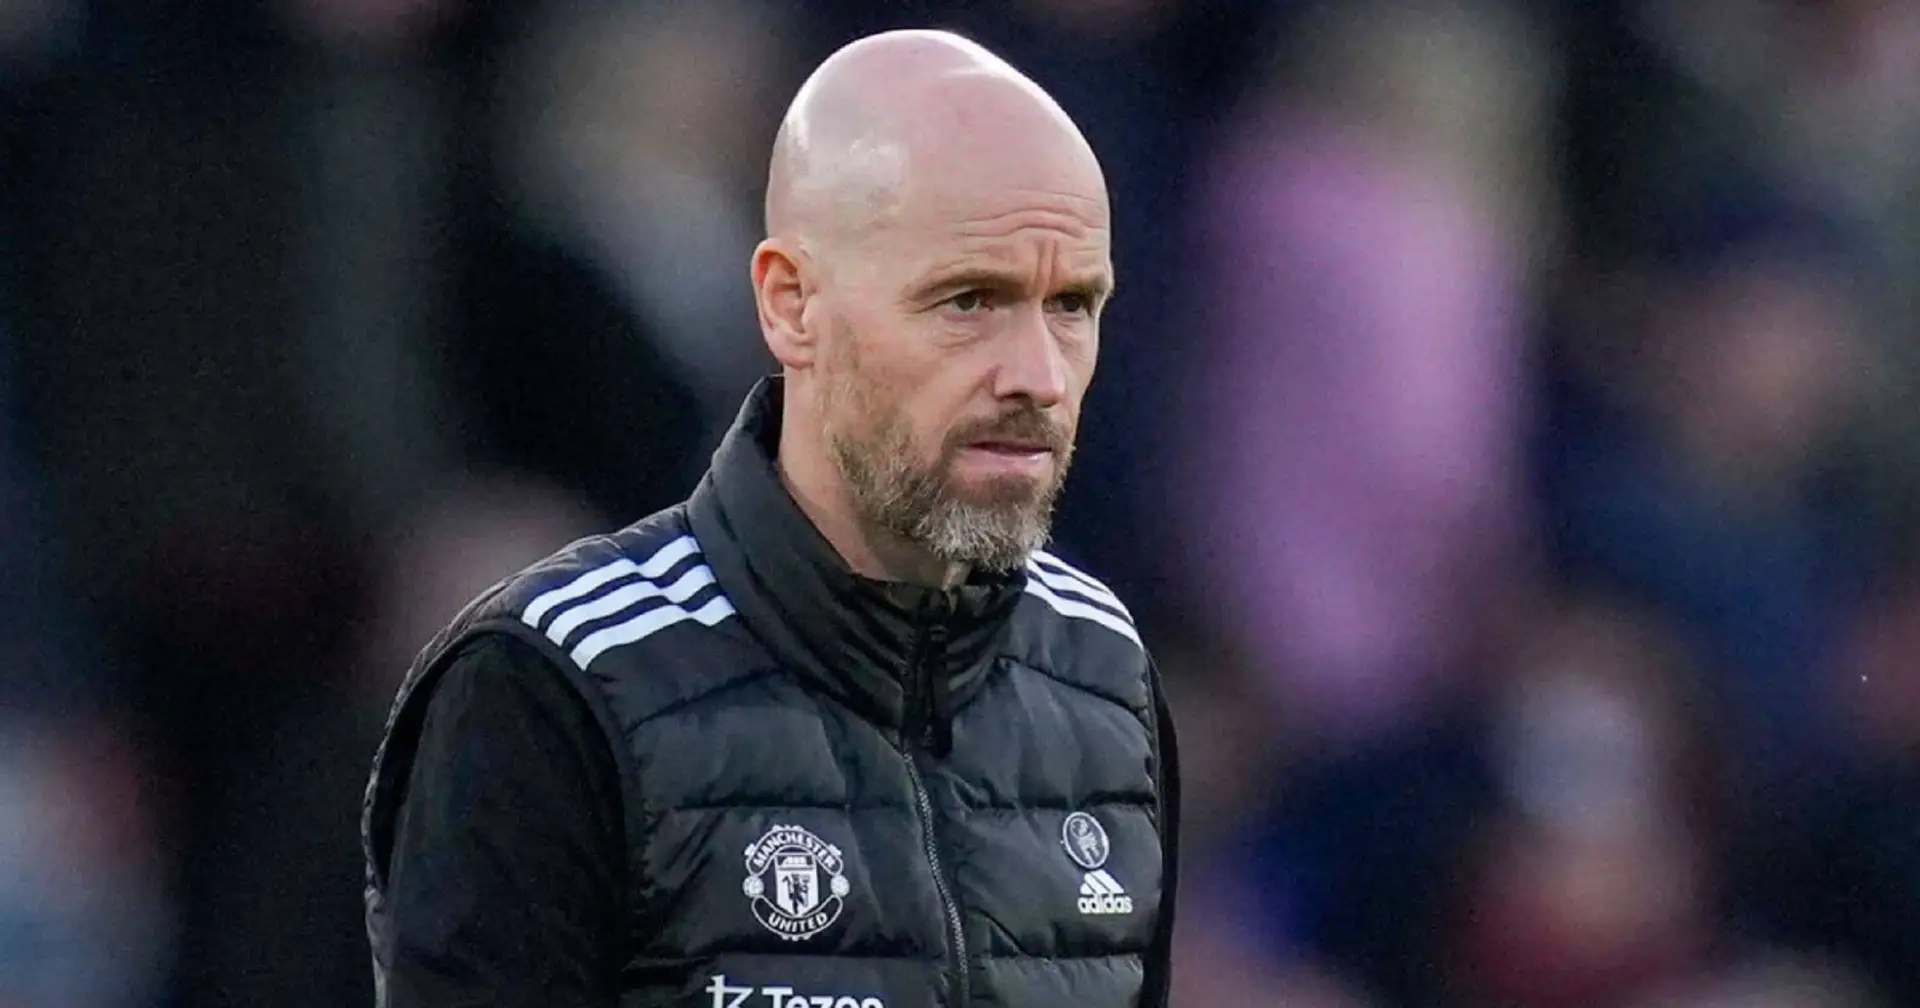 Man United next manager odds: who's leading the race to replace Ten Hag?